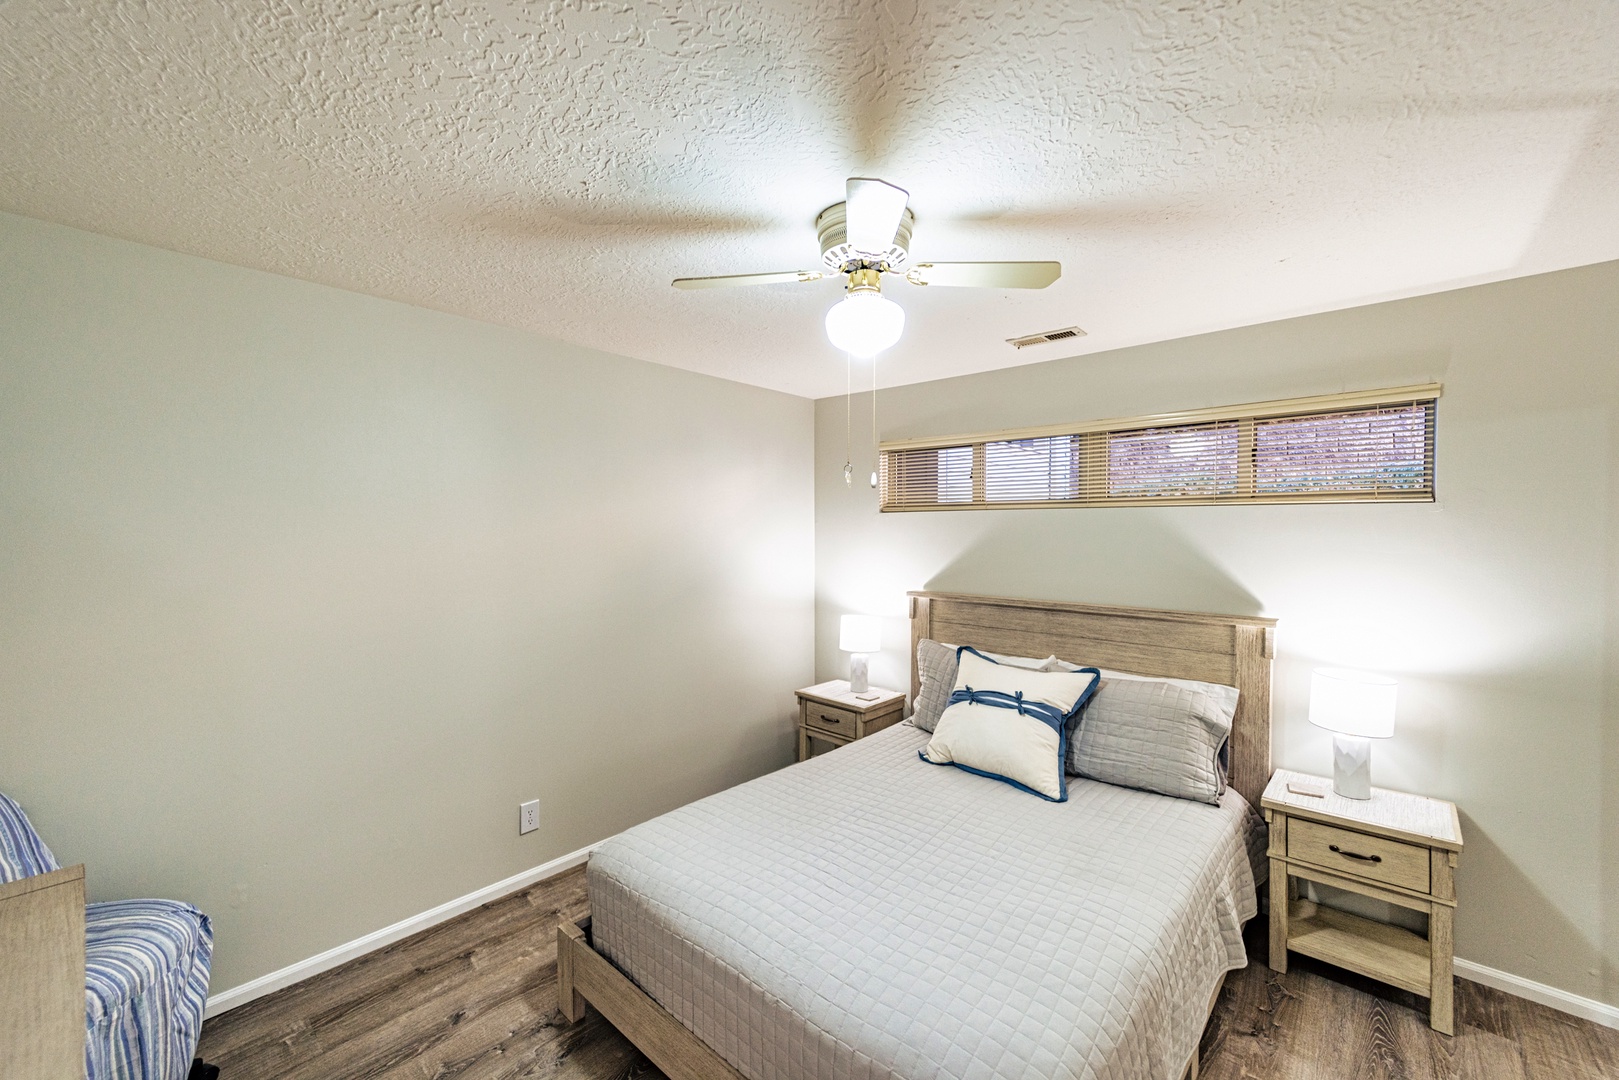 Relax in the peaceful second bedroom with a comfortable queen bed